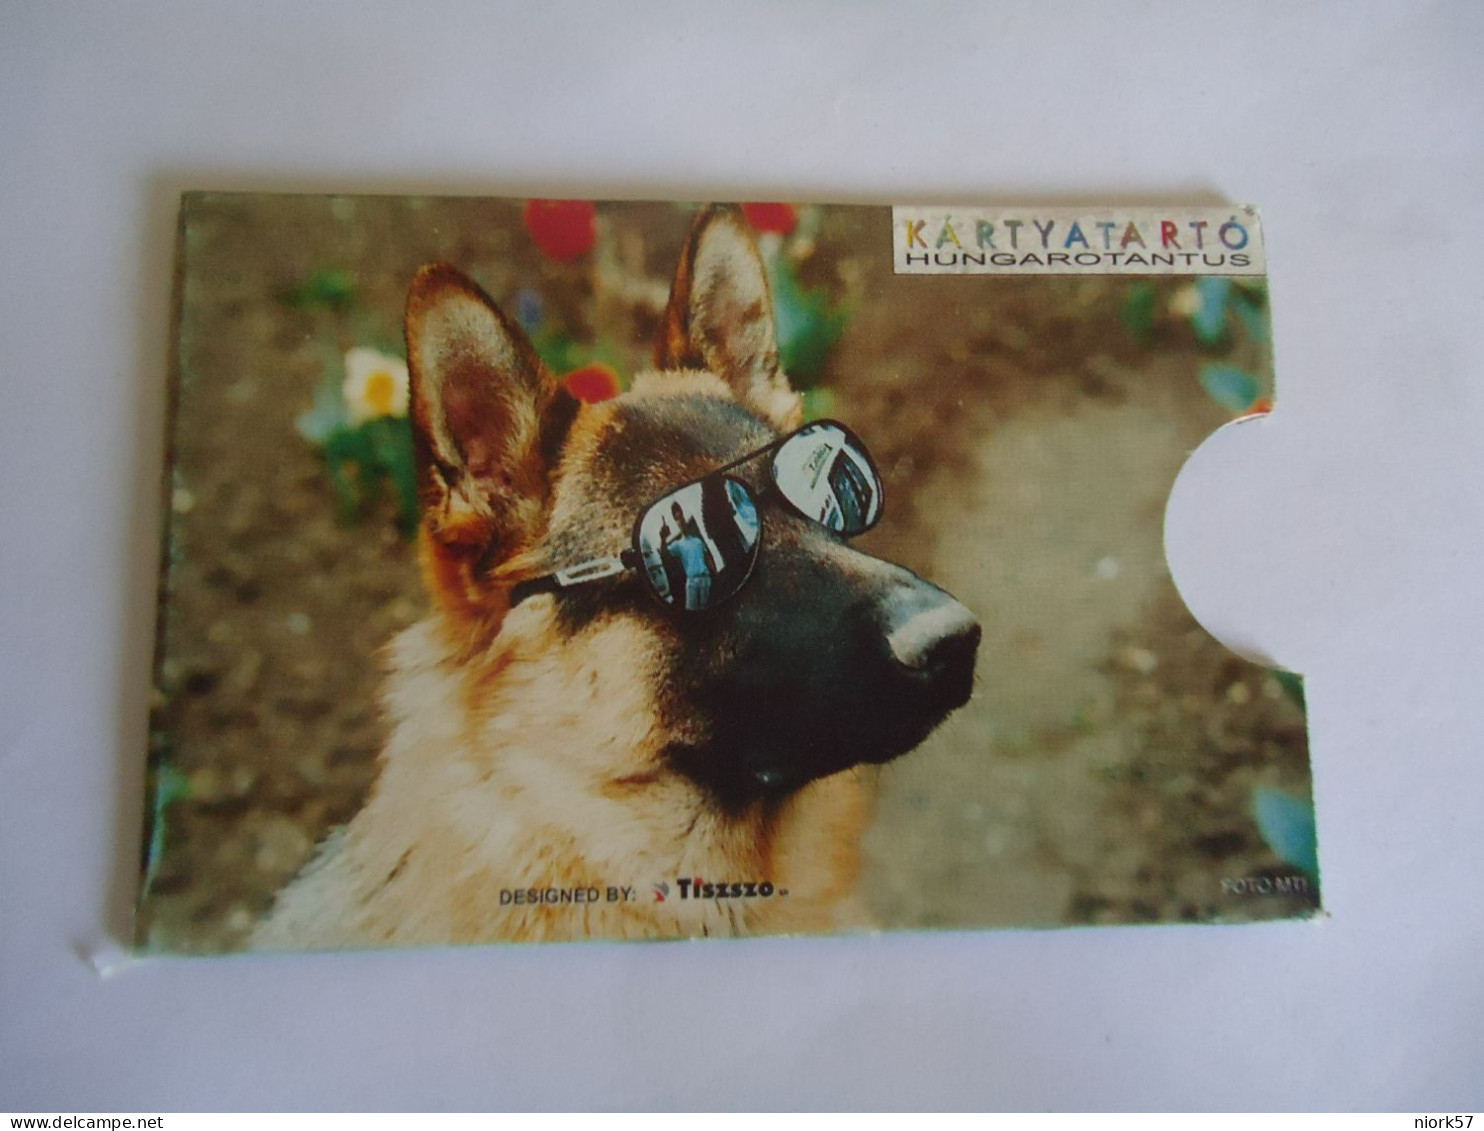 CARDBOX FOR PHONECARDS  ANIMALS DOGS - Chiens